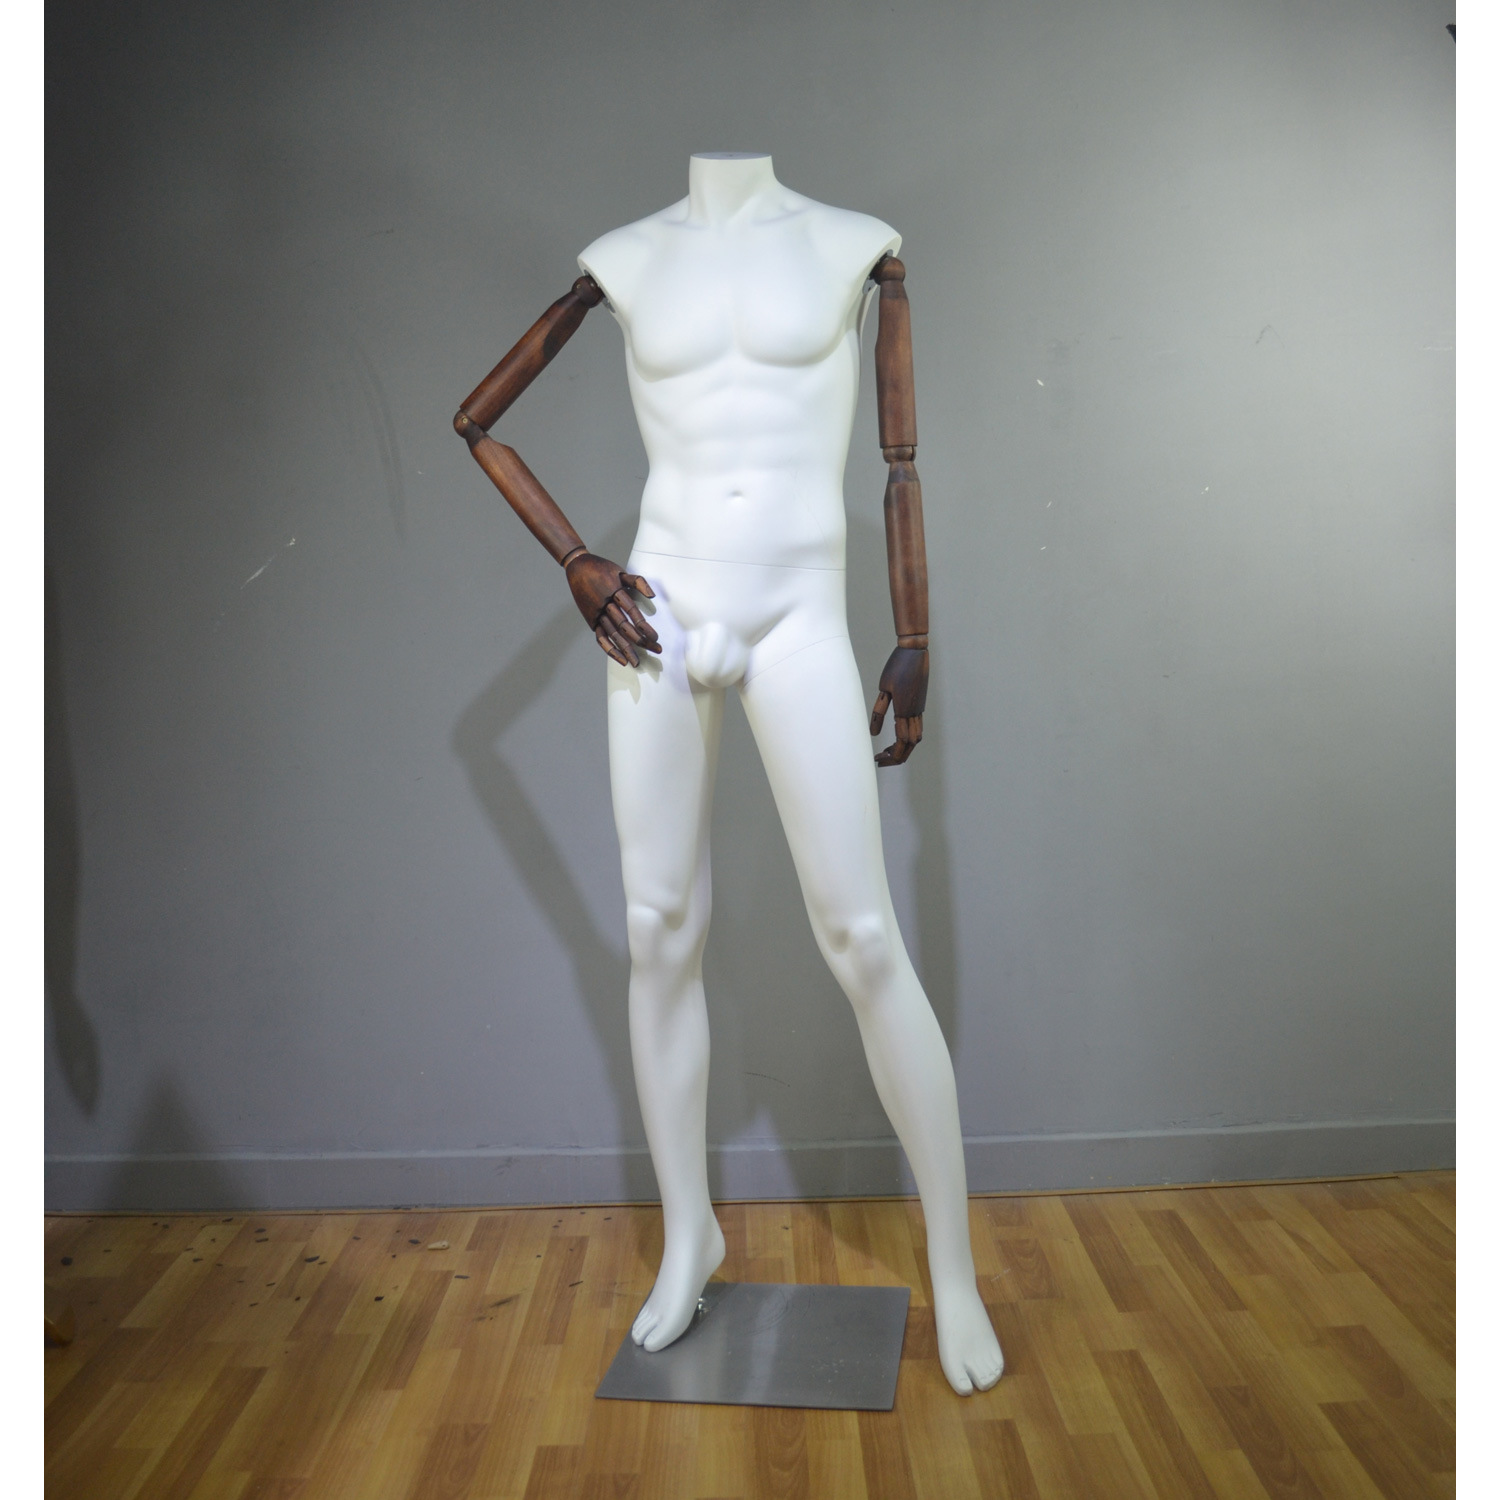 European Headless Male Mannequin with Wooden Hands